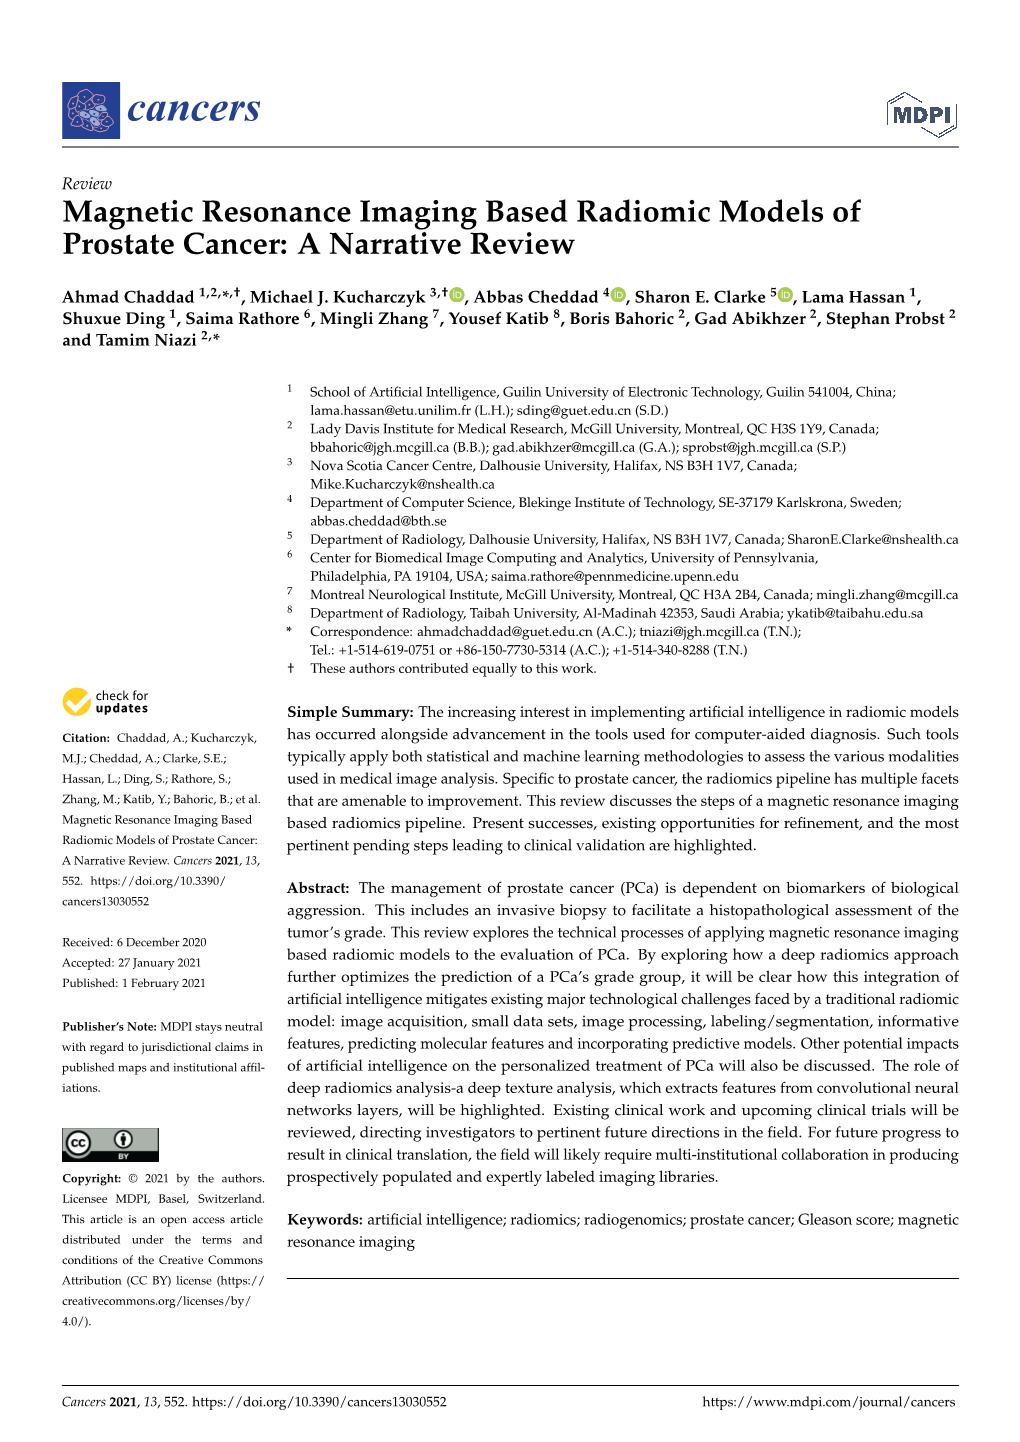 Magnetic Resonance Imaging Based Radiomic Models of Prostate Cancer: a Narrative Review